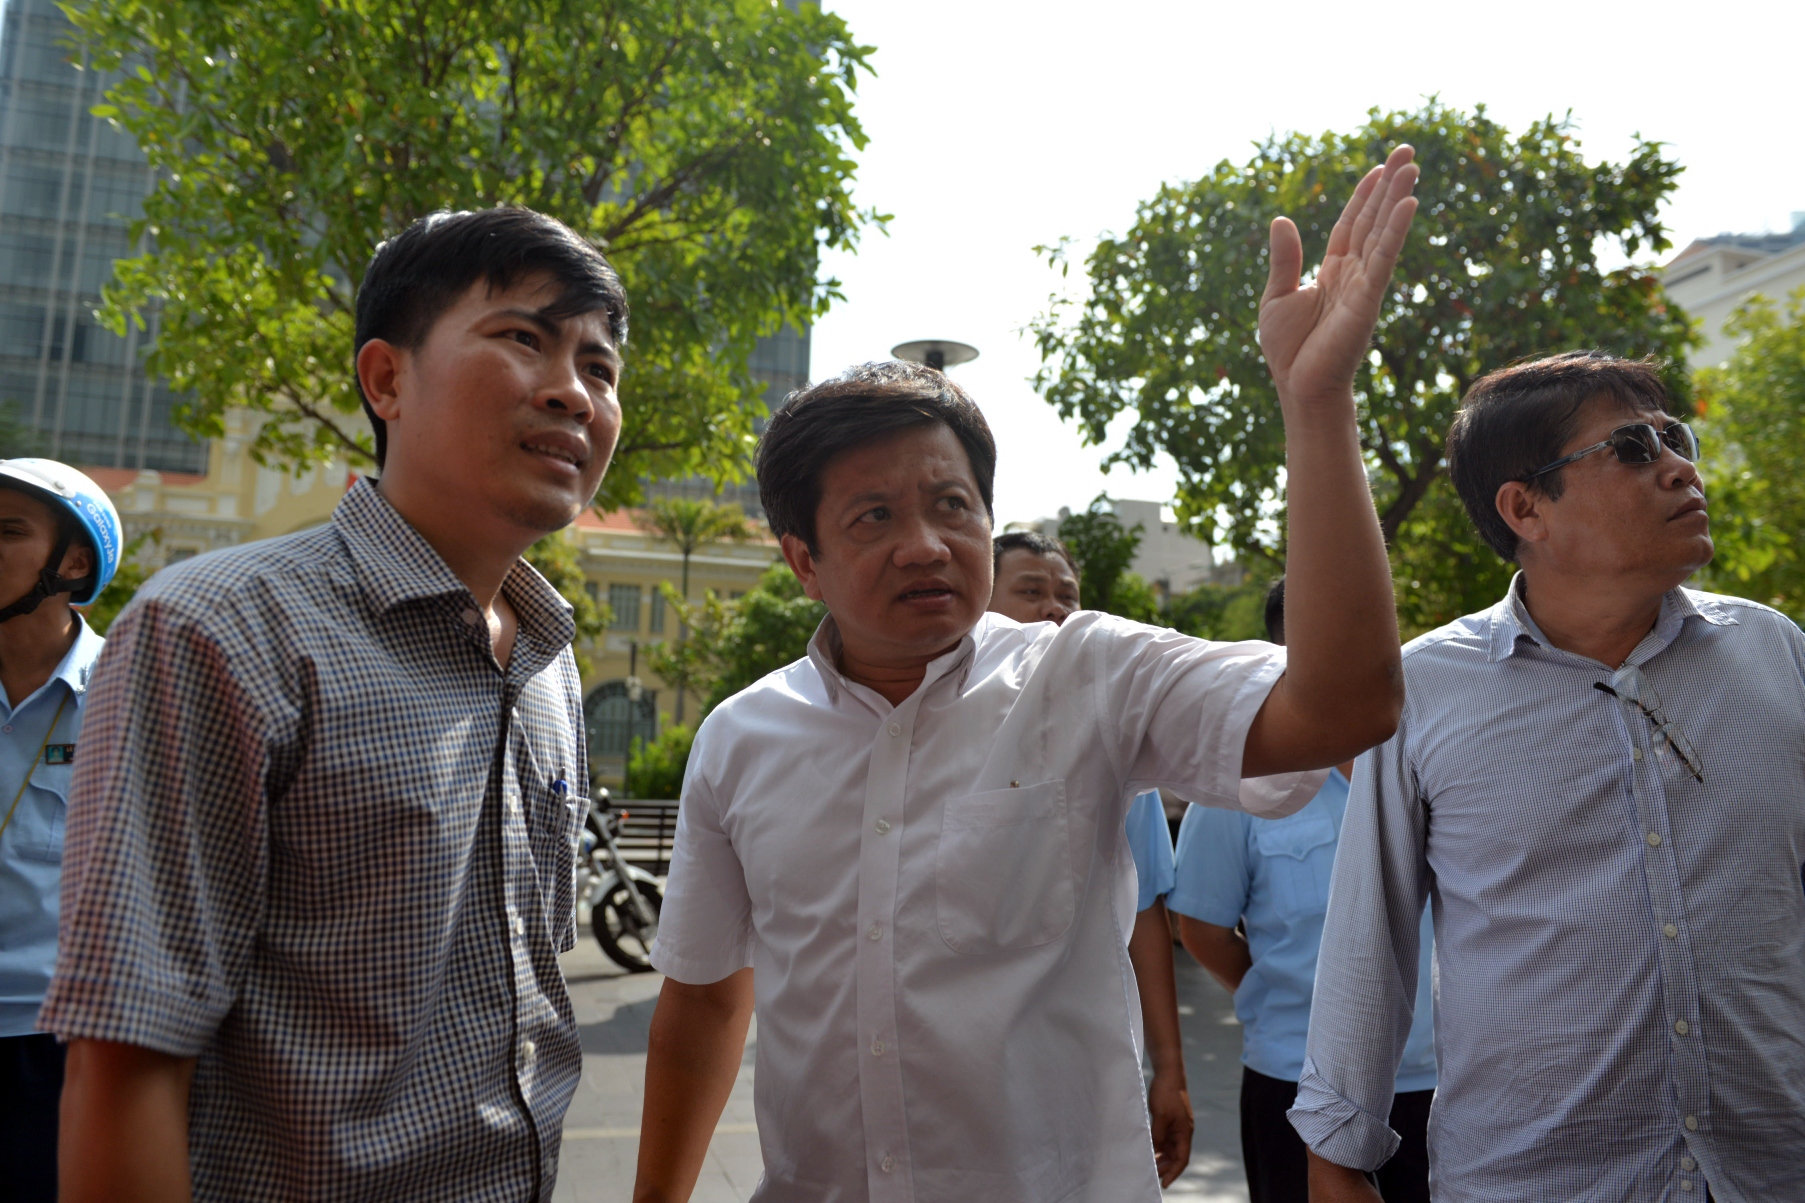 Doan Ngoc Hai gestures during a sidewalk crackdown in Ho Chi Minh City. Photo: Tuoi Tre